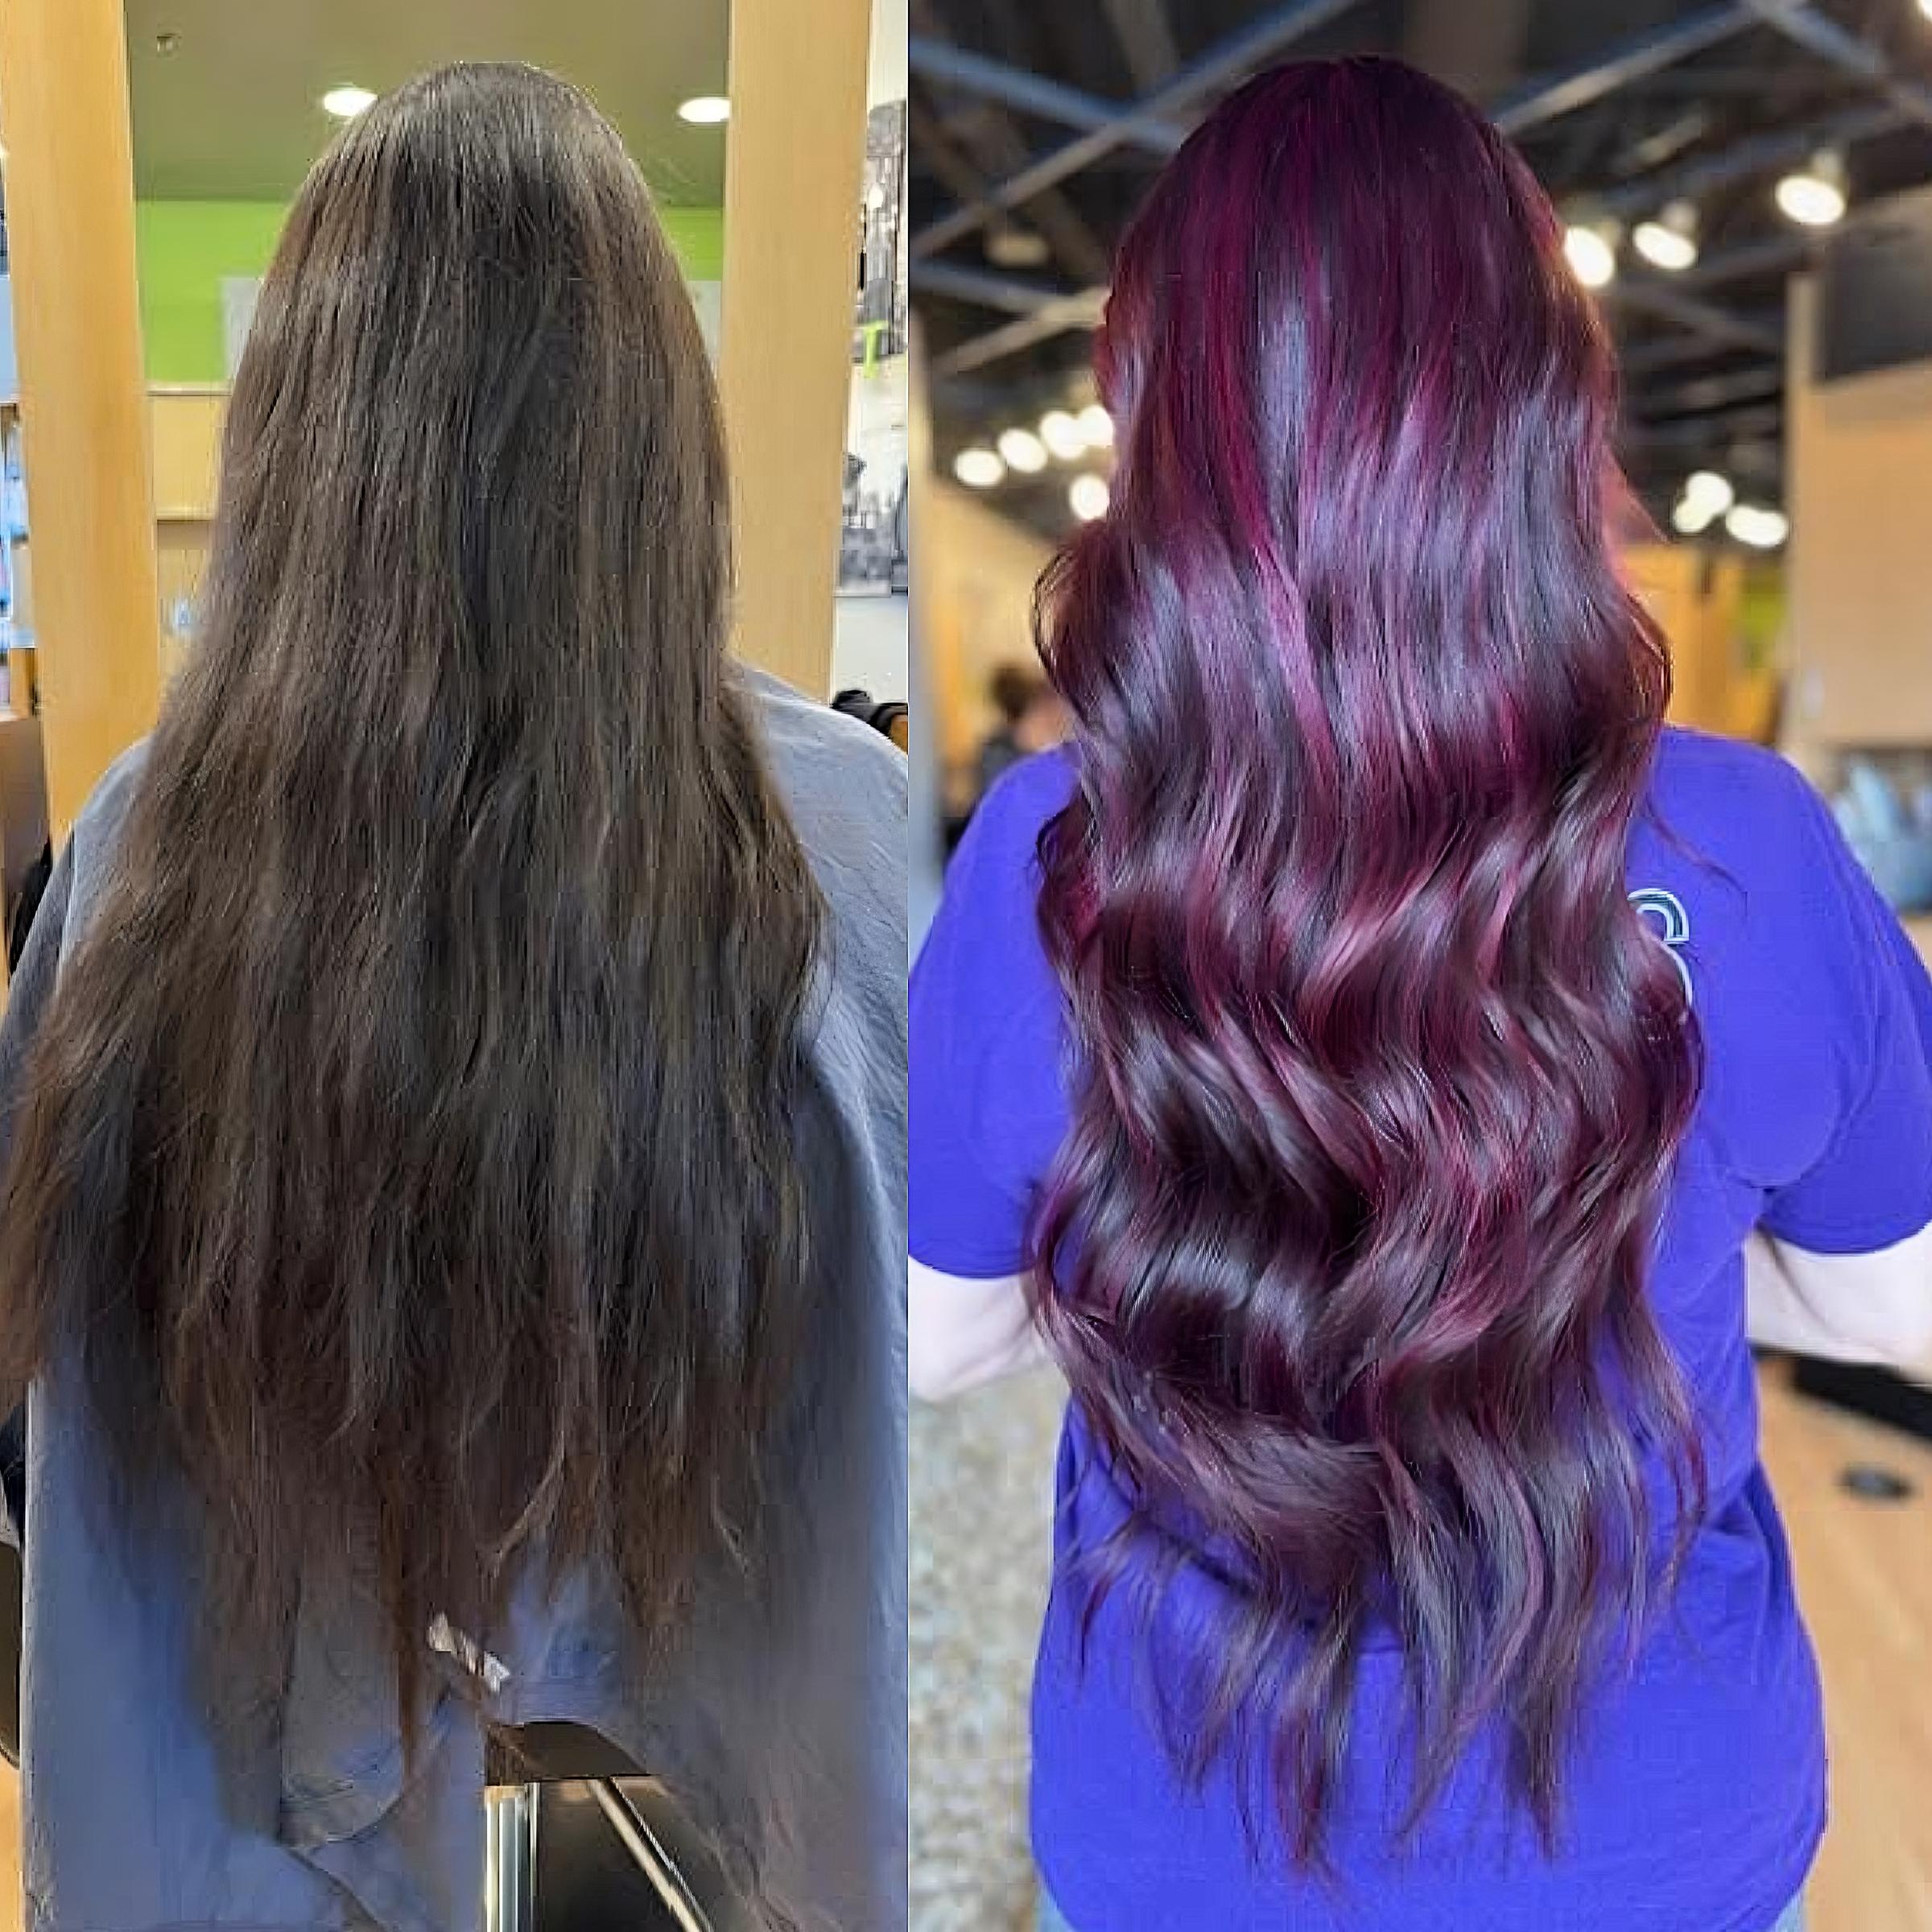 Cherry cola hair color makeover for women with long dark brown hair